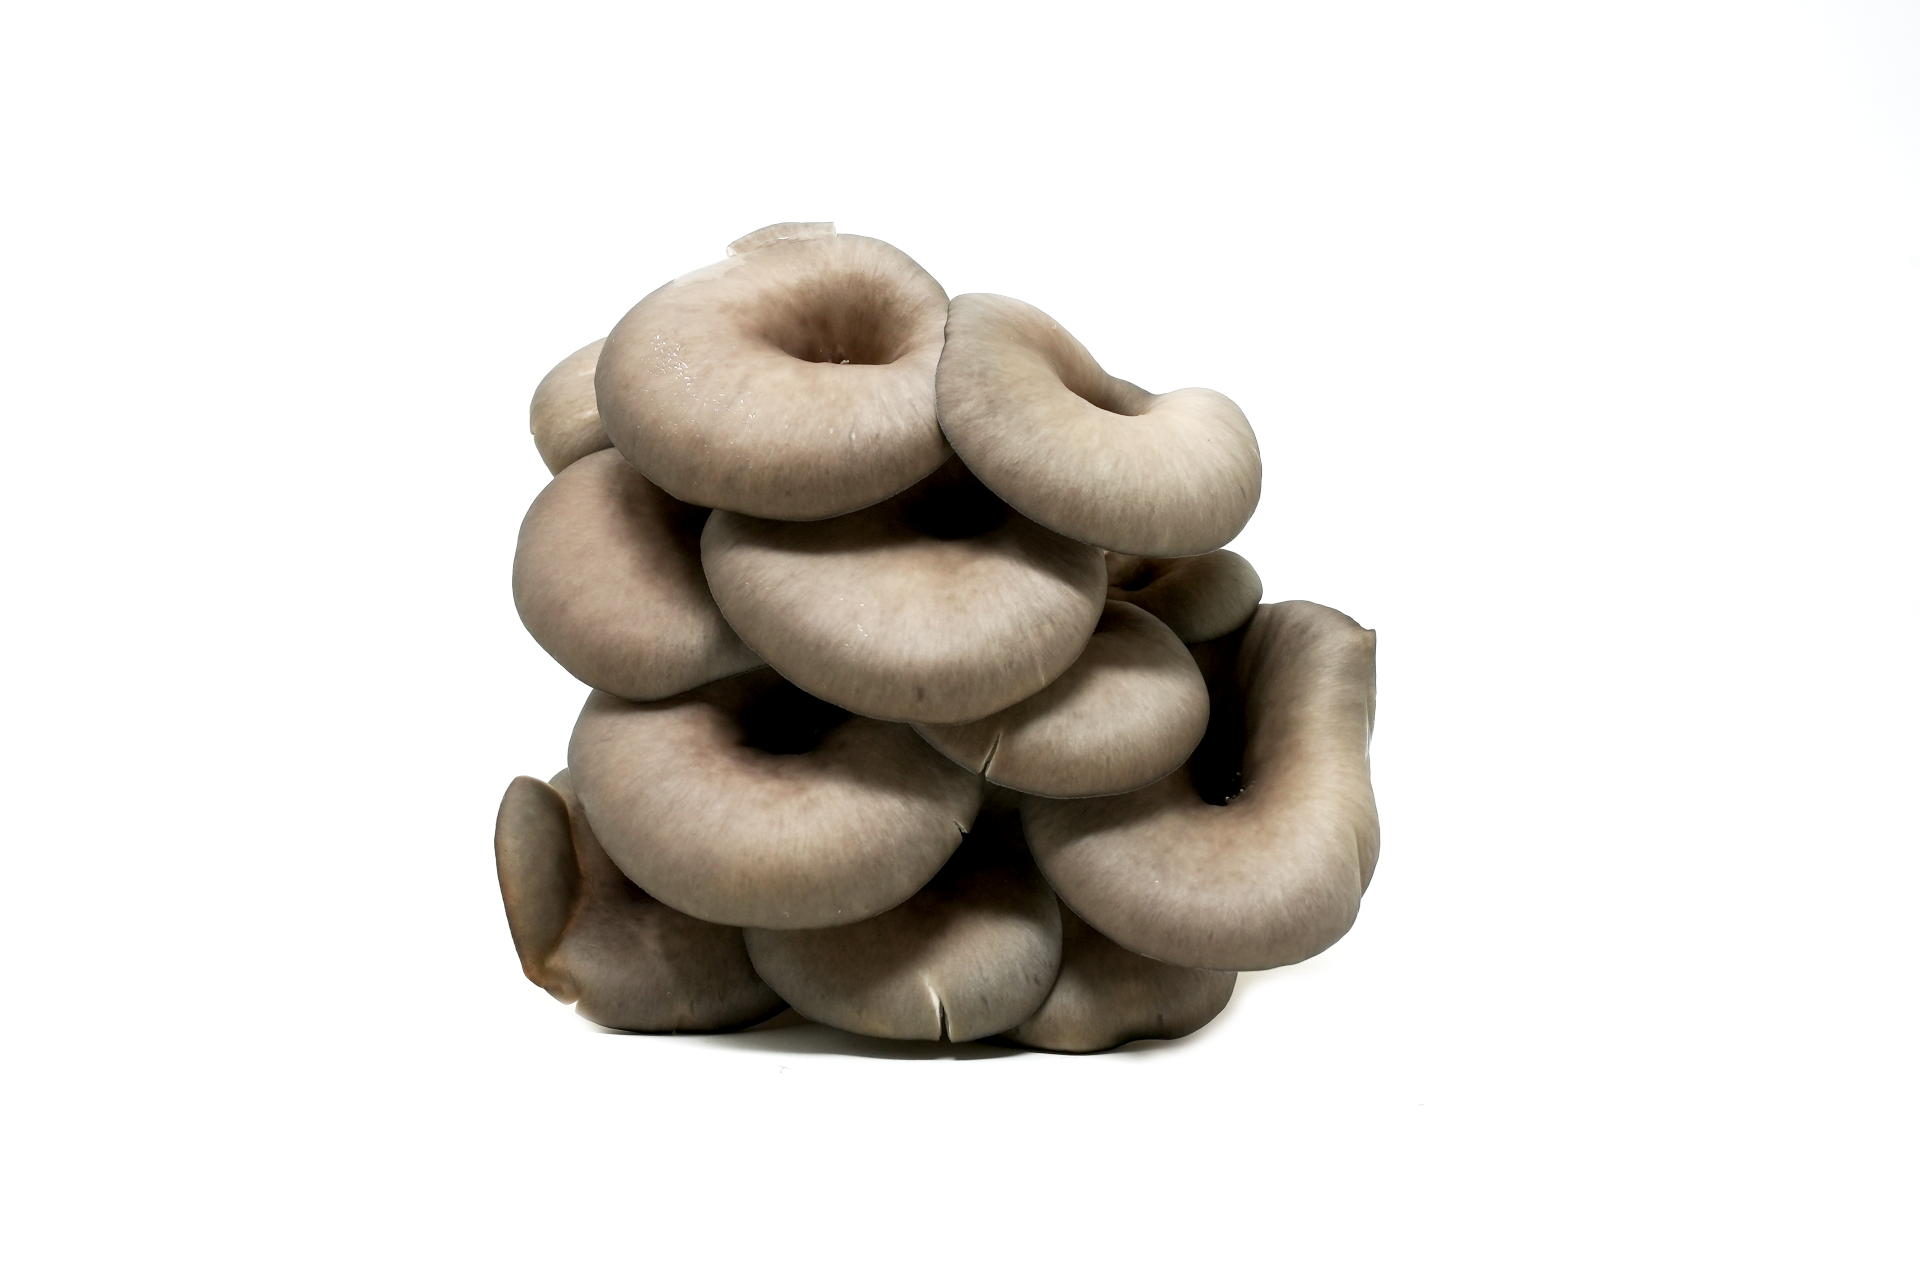 Heartee (Ottawa Farmed) Mushrooms - 1/2lb Variety Pack (Assembled by MPO)